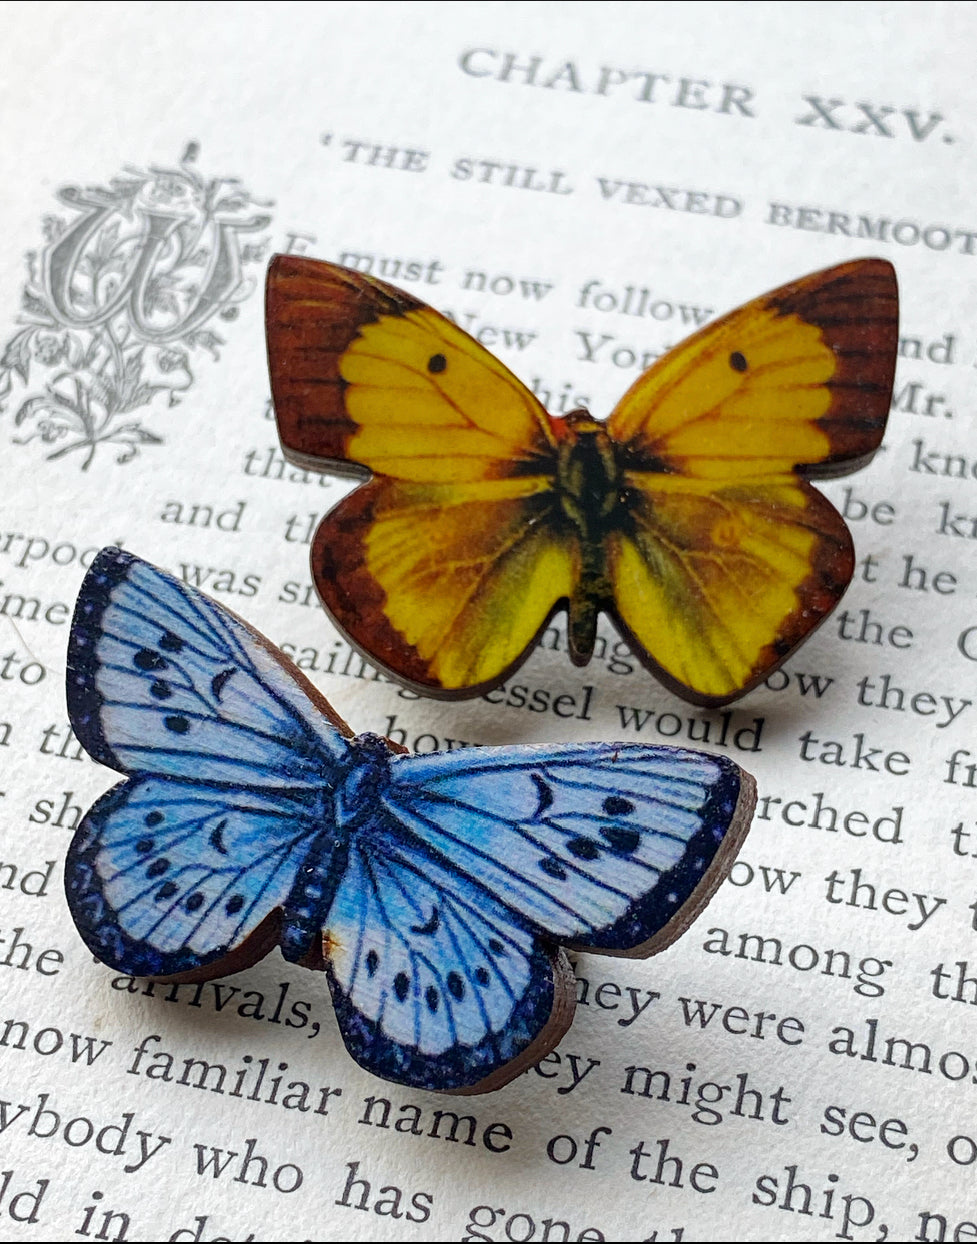 Two British Butterfly Brooches